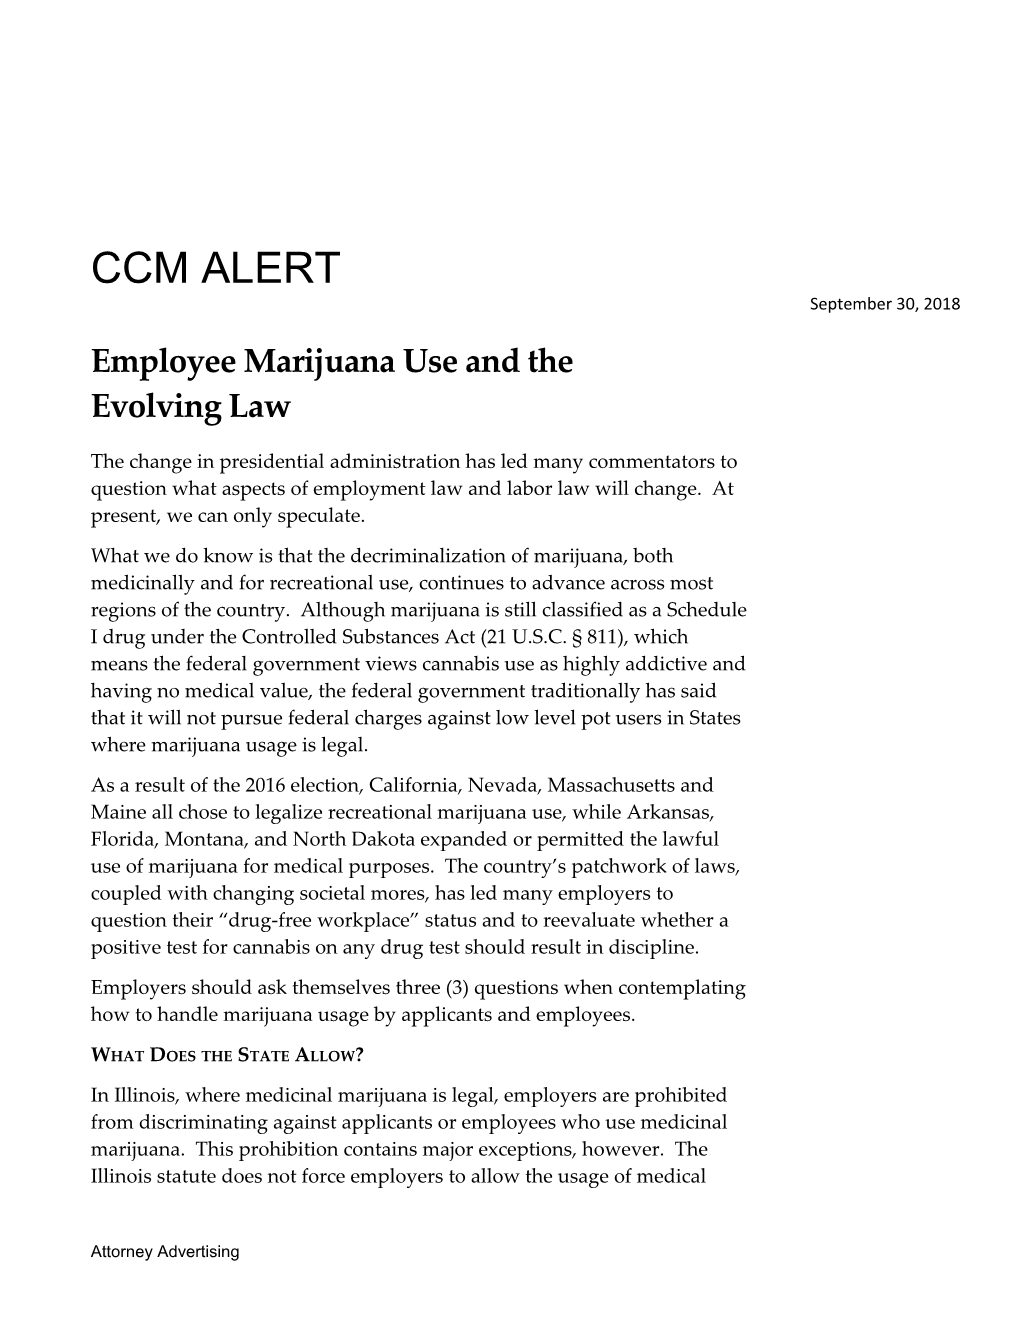 CCM Client Alert - Employee Marijuana Use and the Evolving Law (00335562-3)